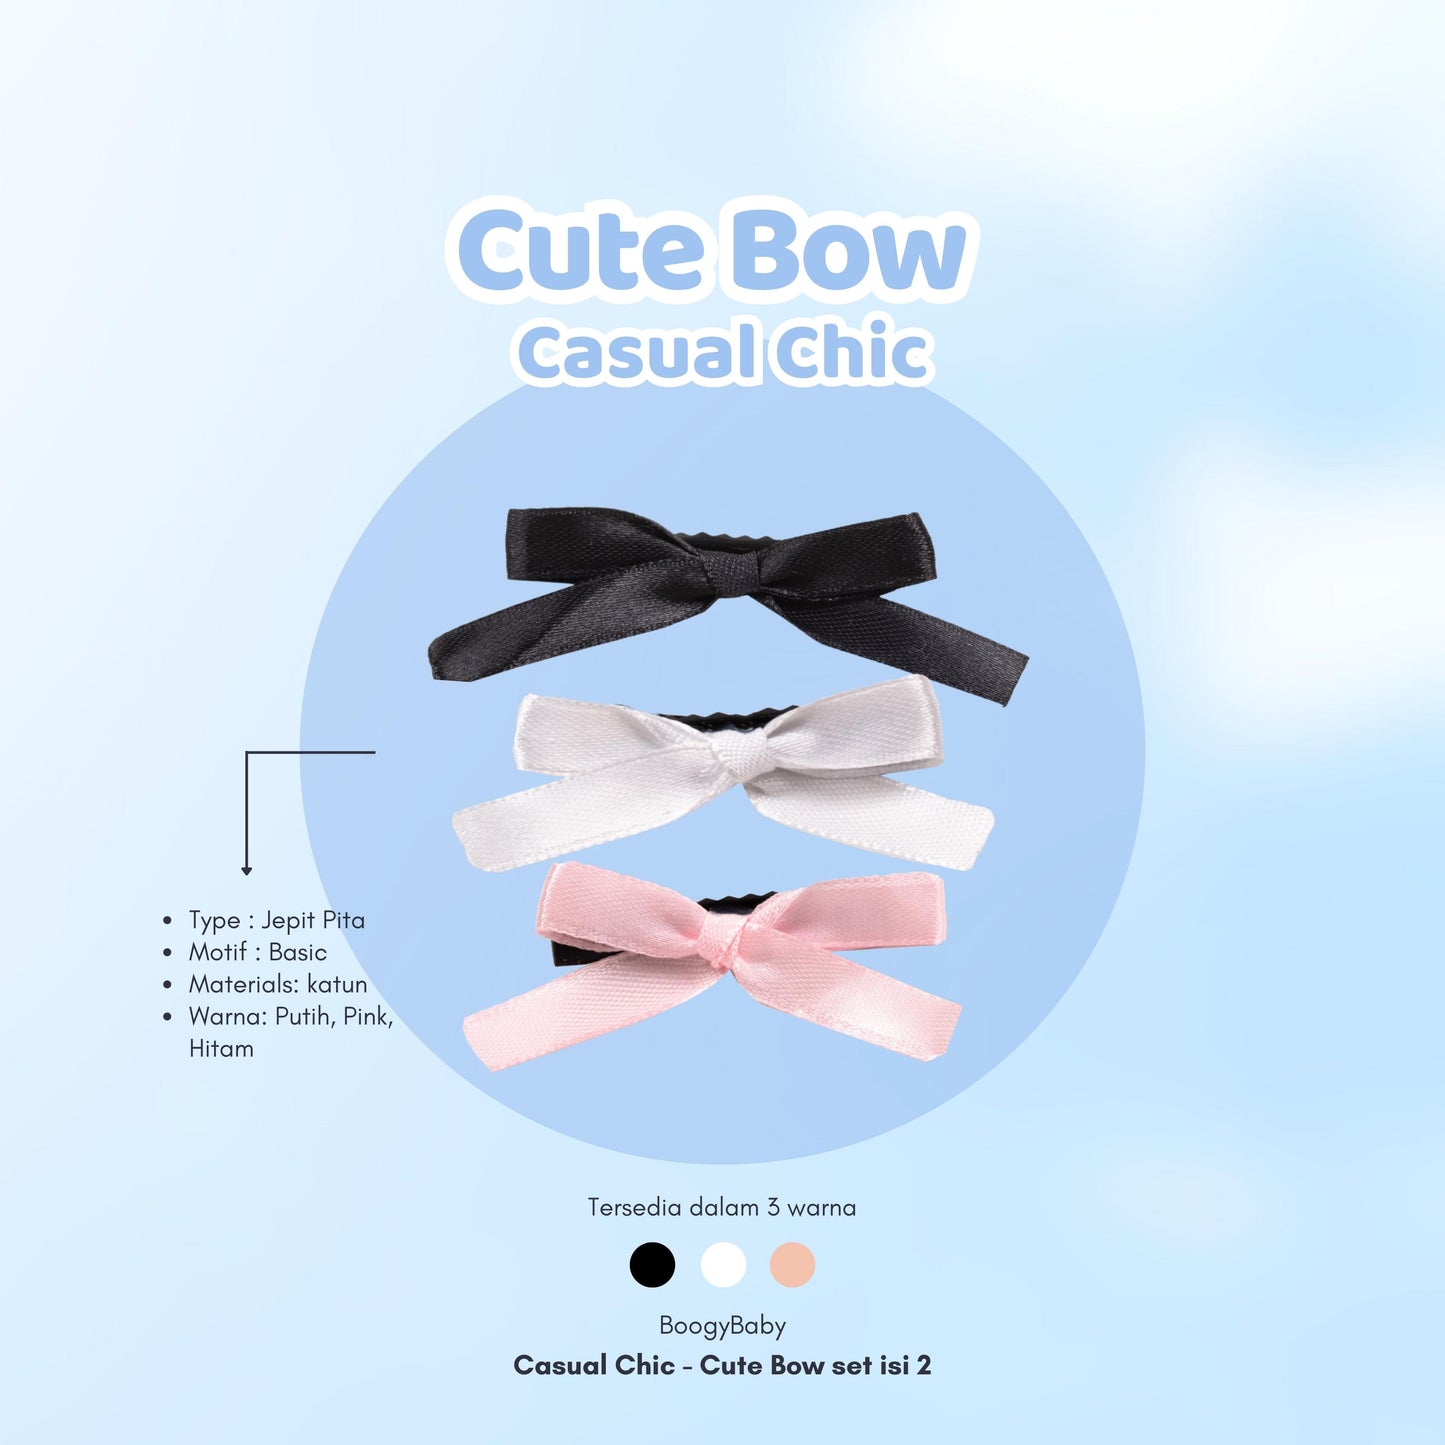 Cute Bow set isi 2 (Casual Chic)